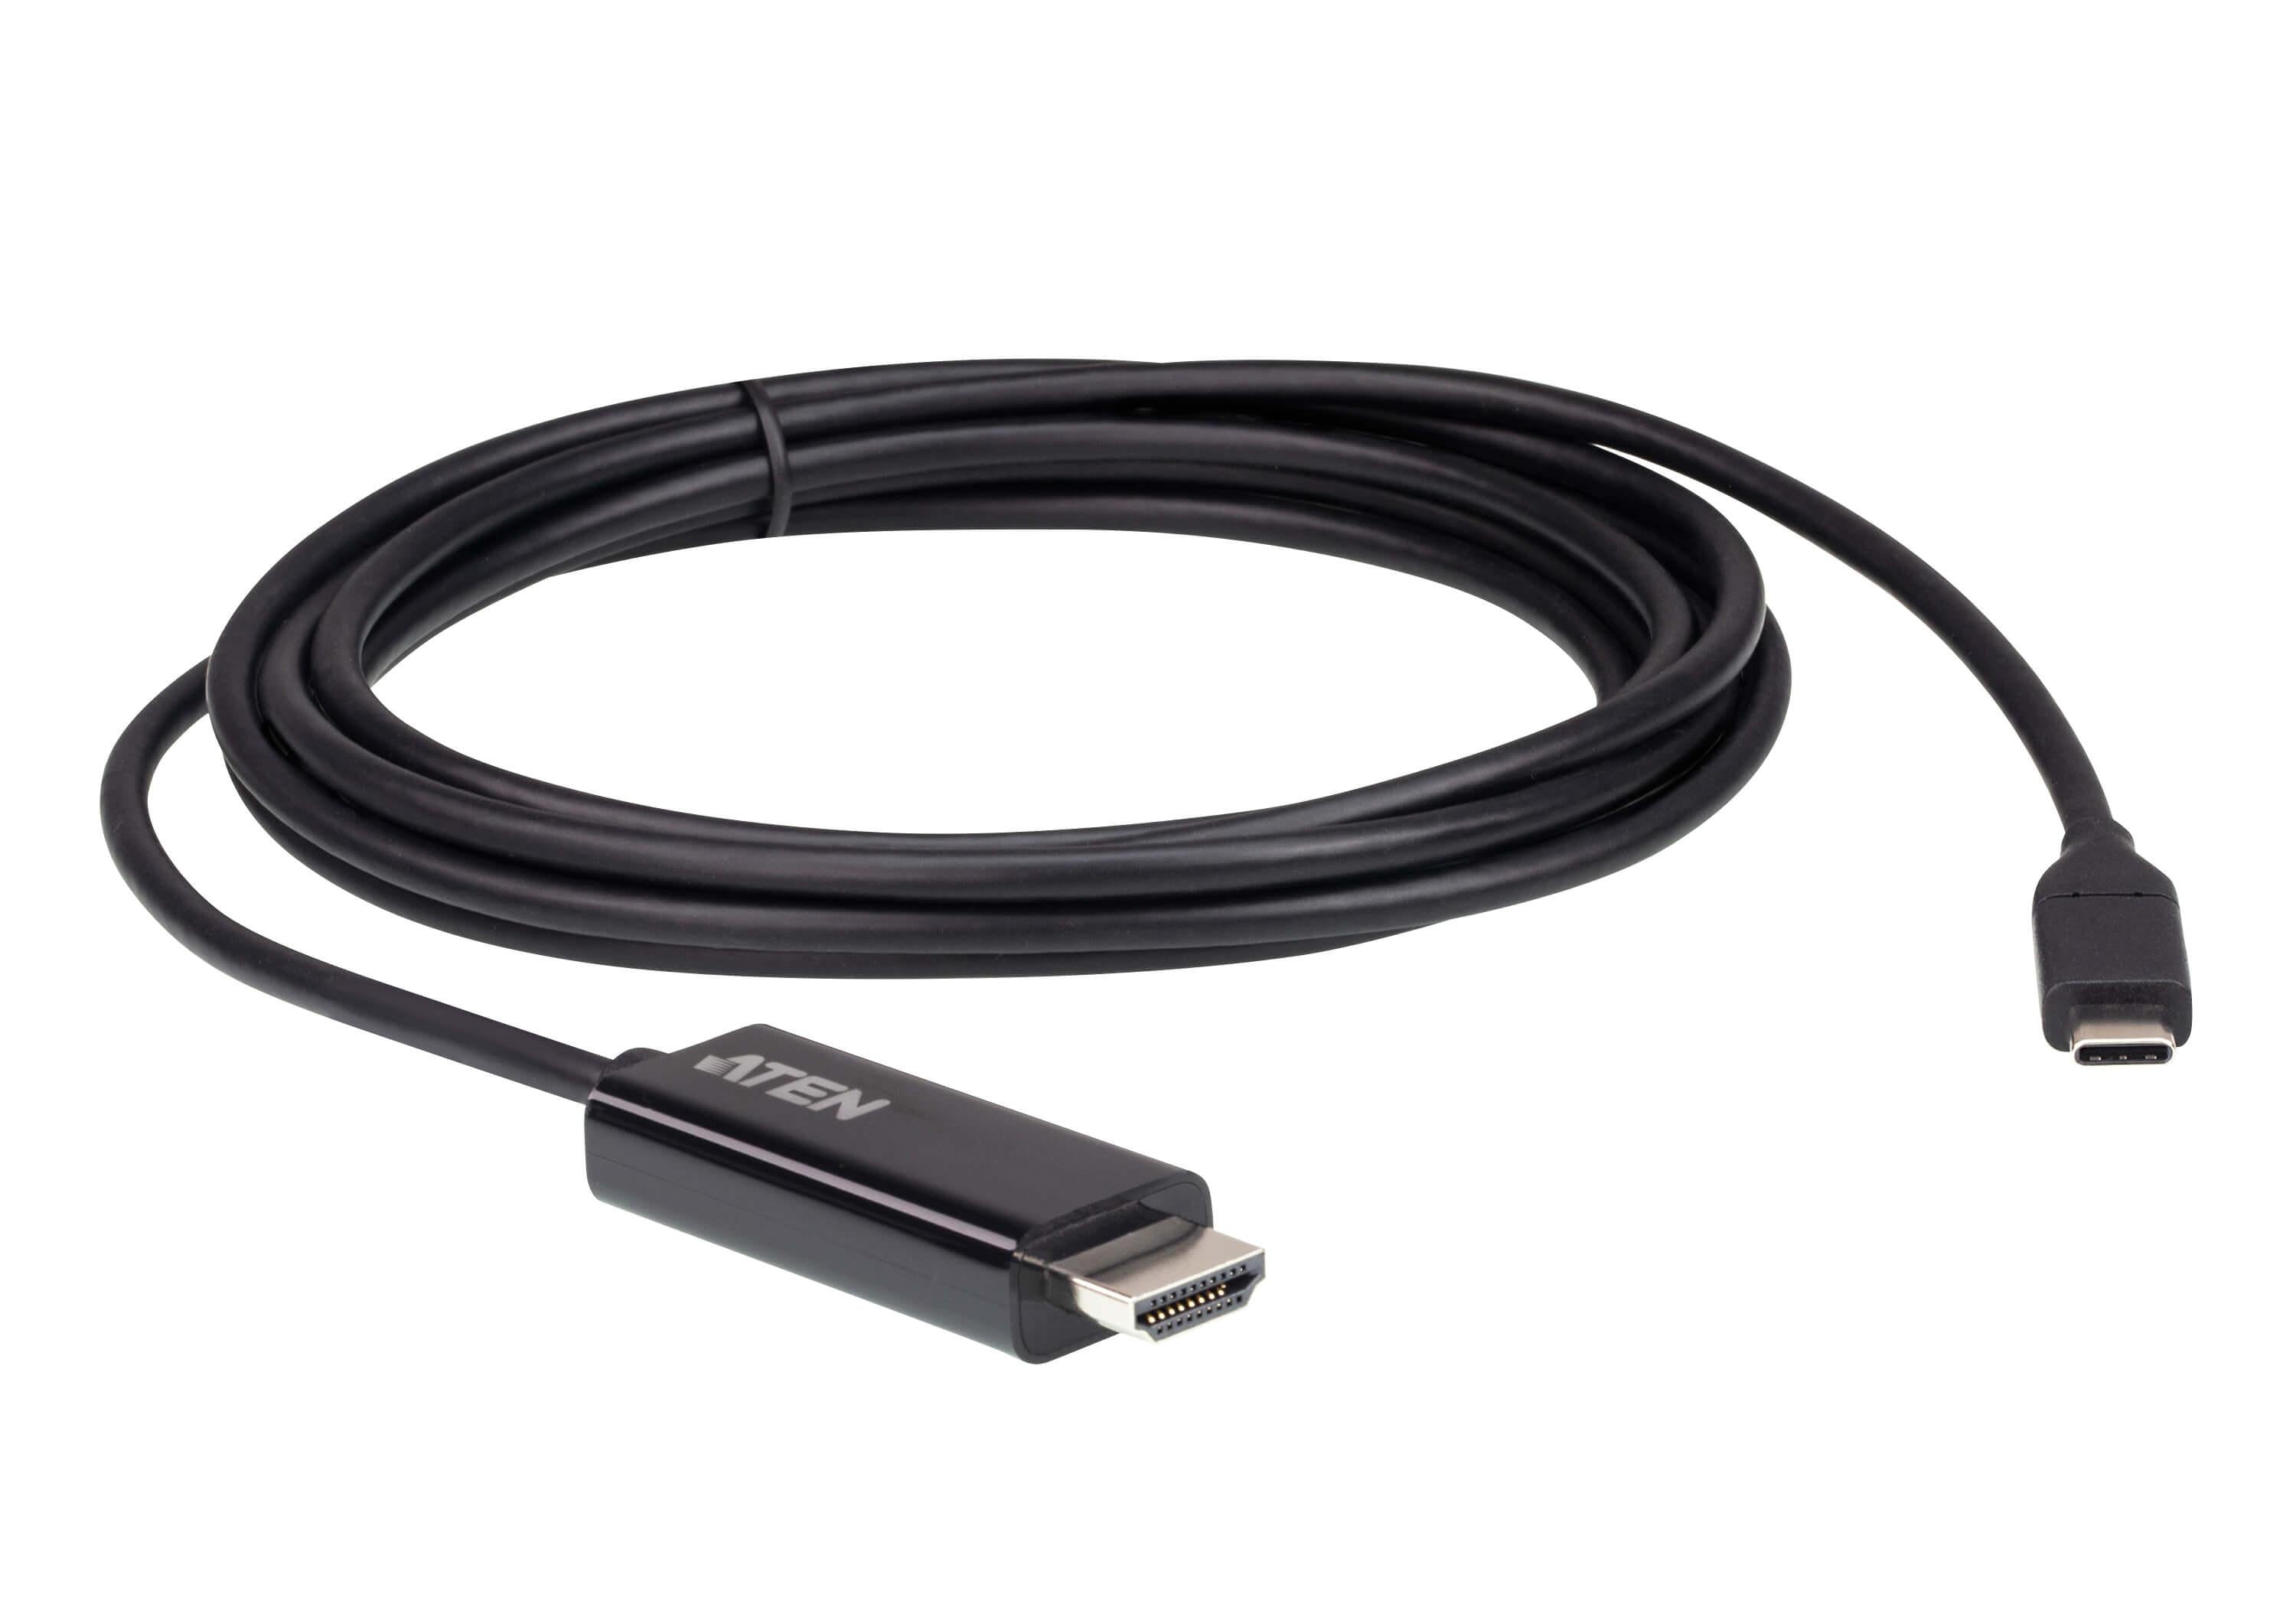 Aten USB-C to HDMI 4K 2.7m Cable, supports up to 4K @ 60Hz with high quality cable ATEN